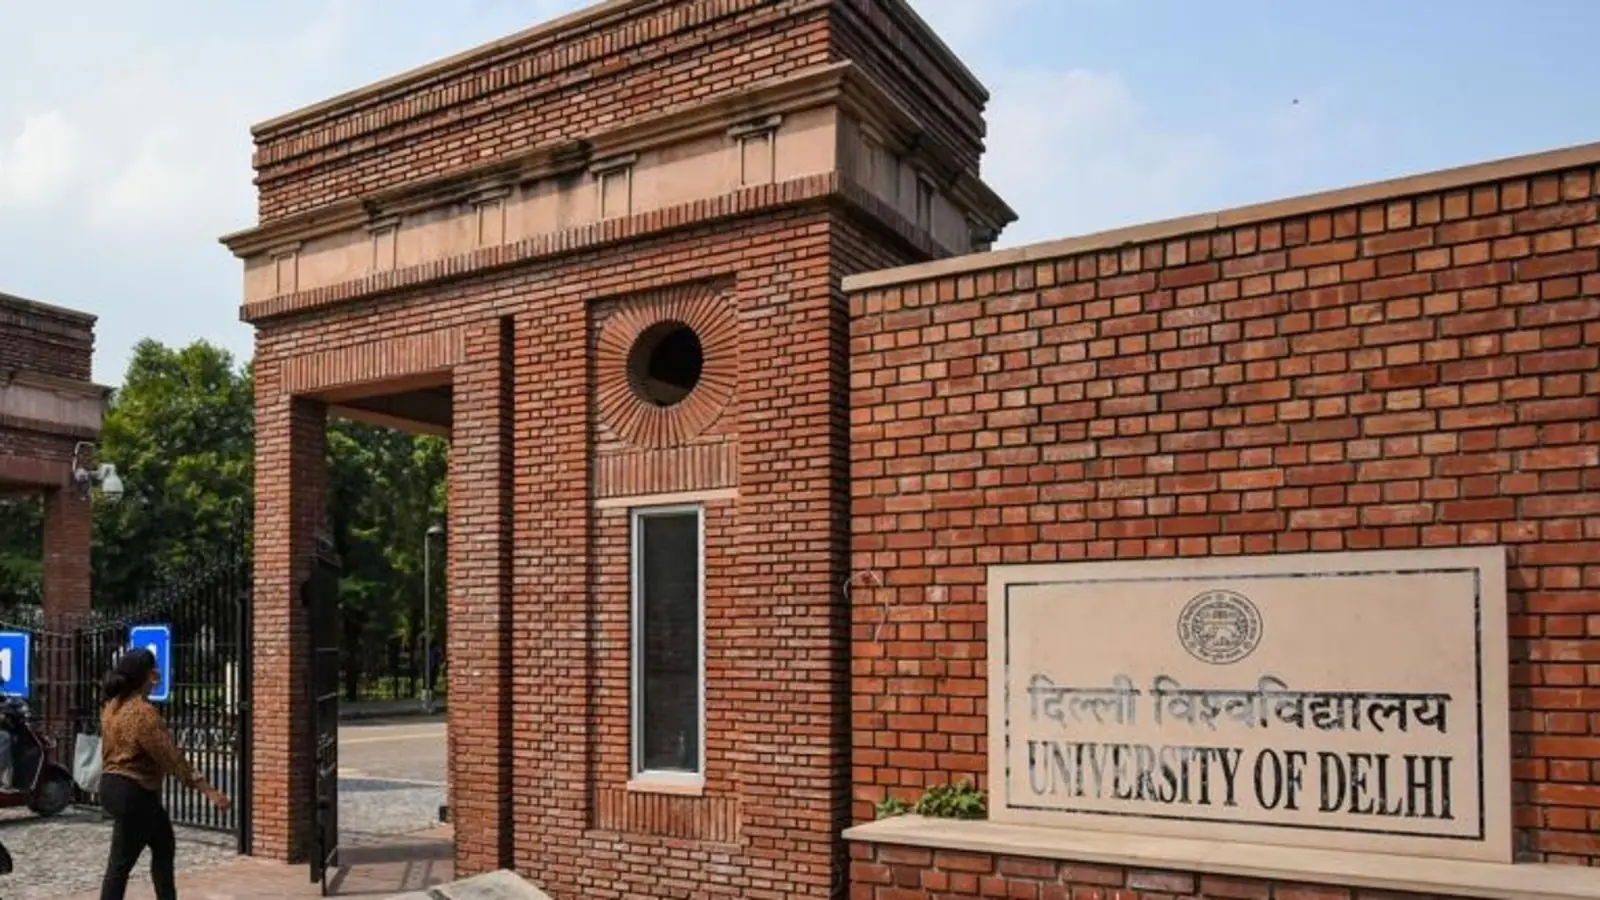 Delhi and its university: How an institution helped shape a city